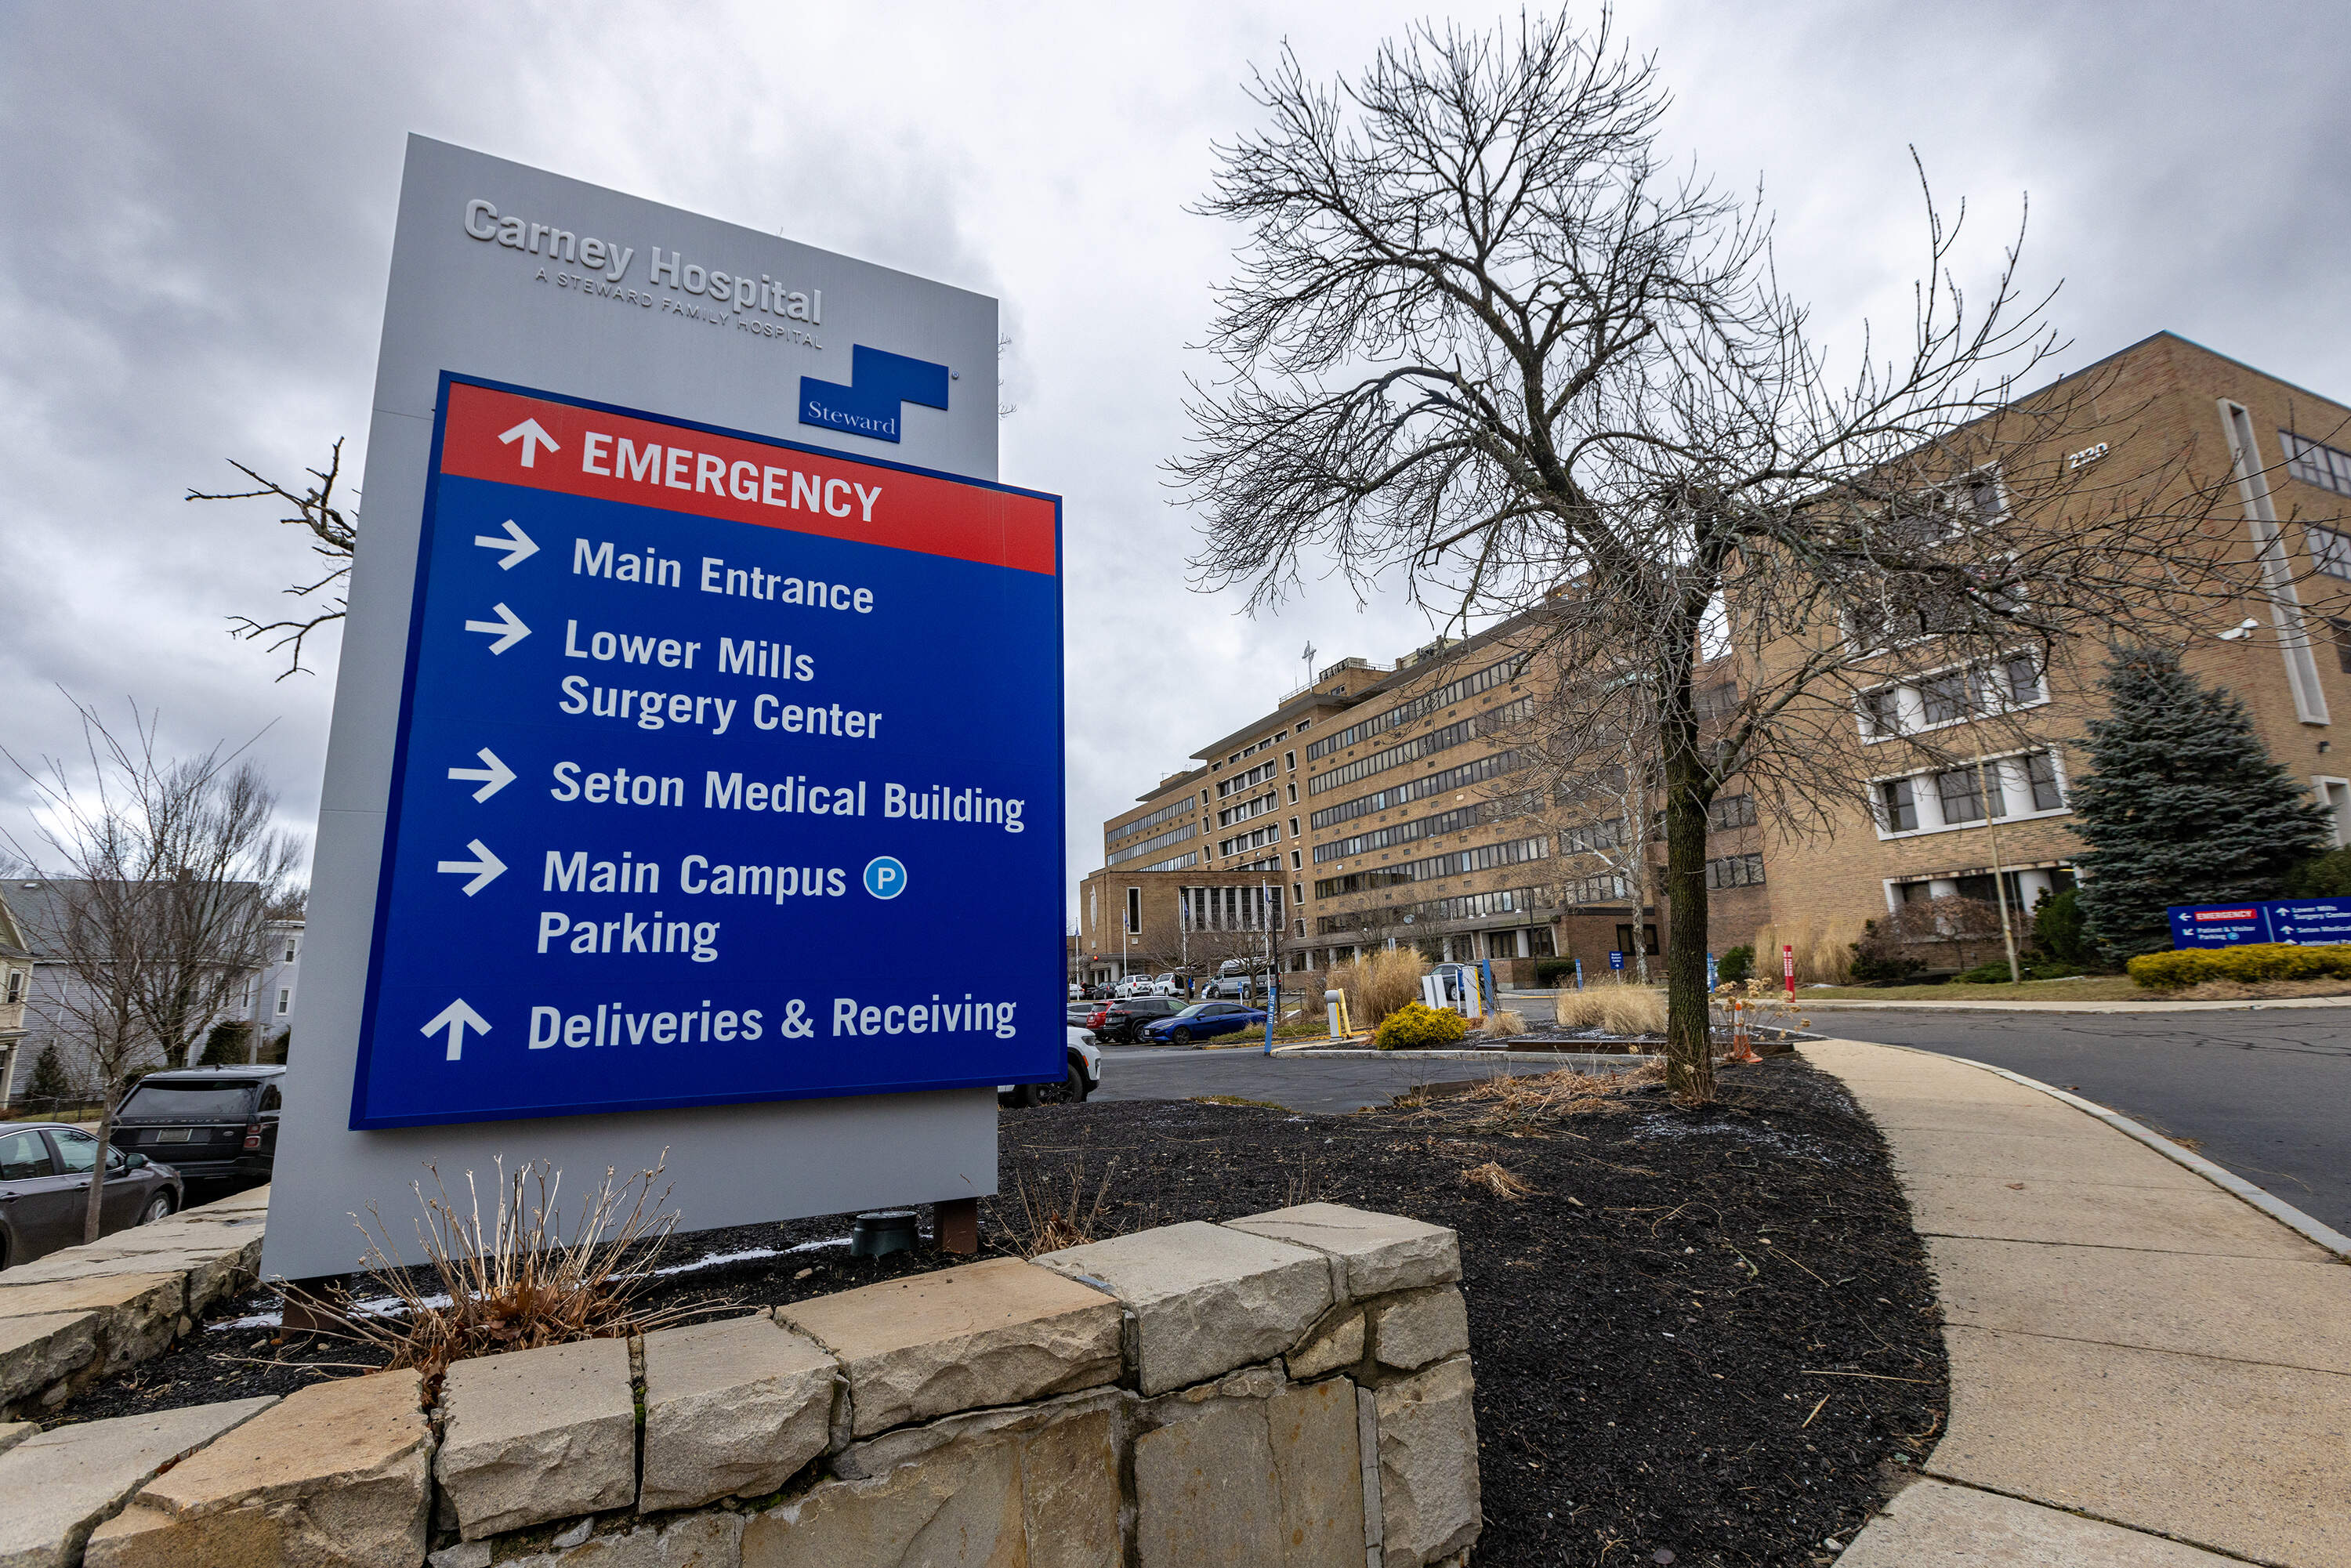 Massachusetts Officials Are Preparing Contingency Plans To Prevent The Closure Of Stewarded Health Care Facilities, Including Carney Hospital In Dorchester.  (Jesse Costa/Wbur)